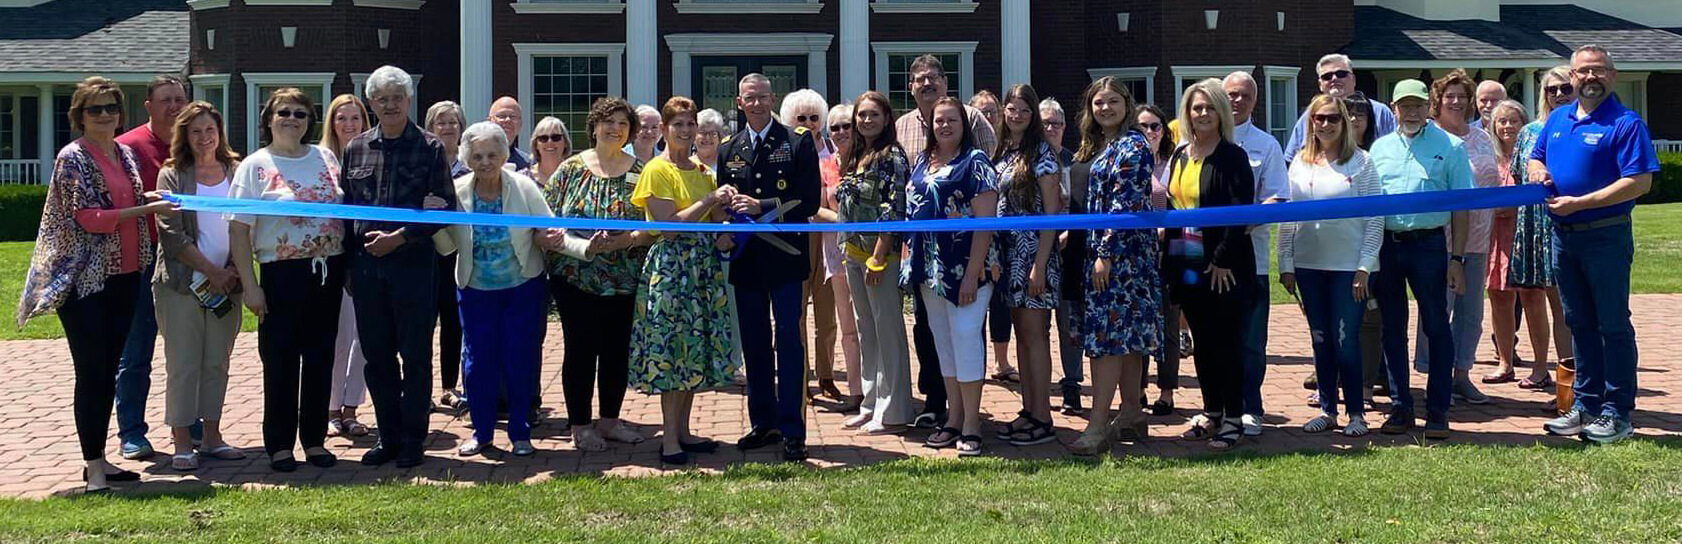 colonels castle ribbon cutting cropped